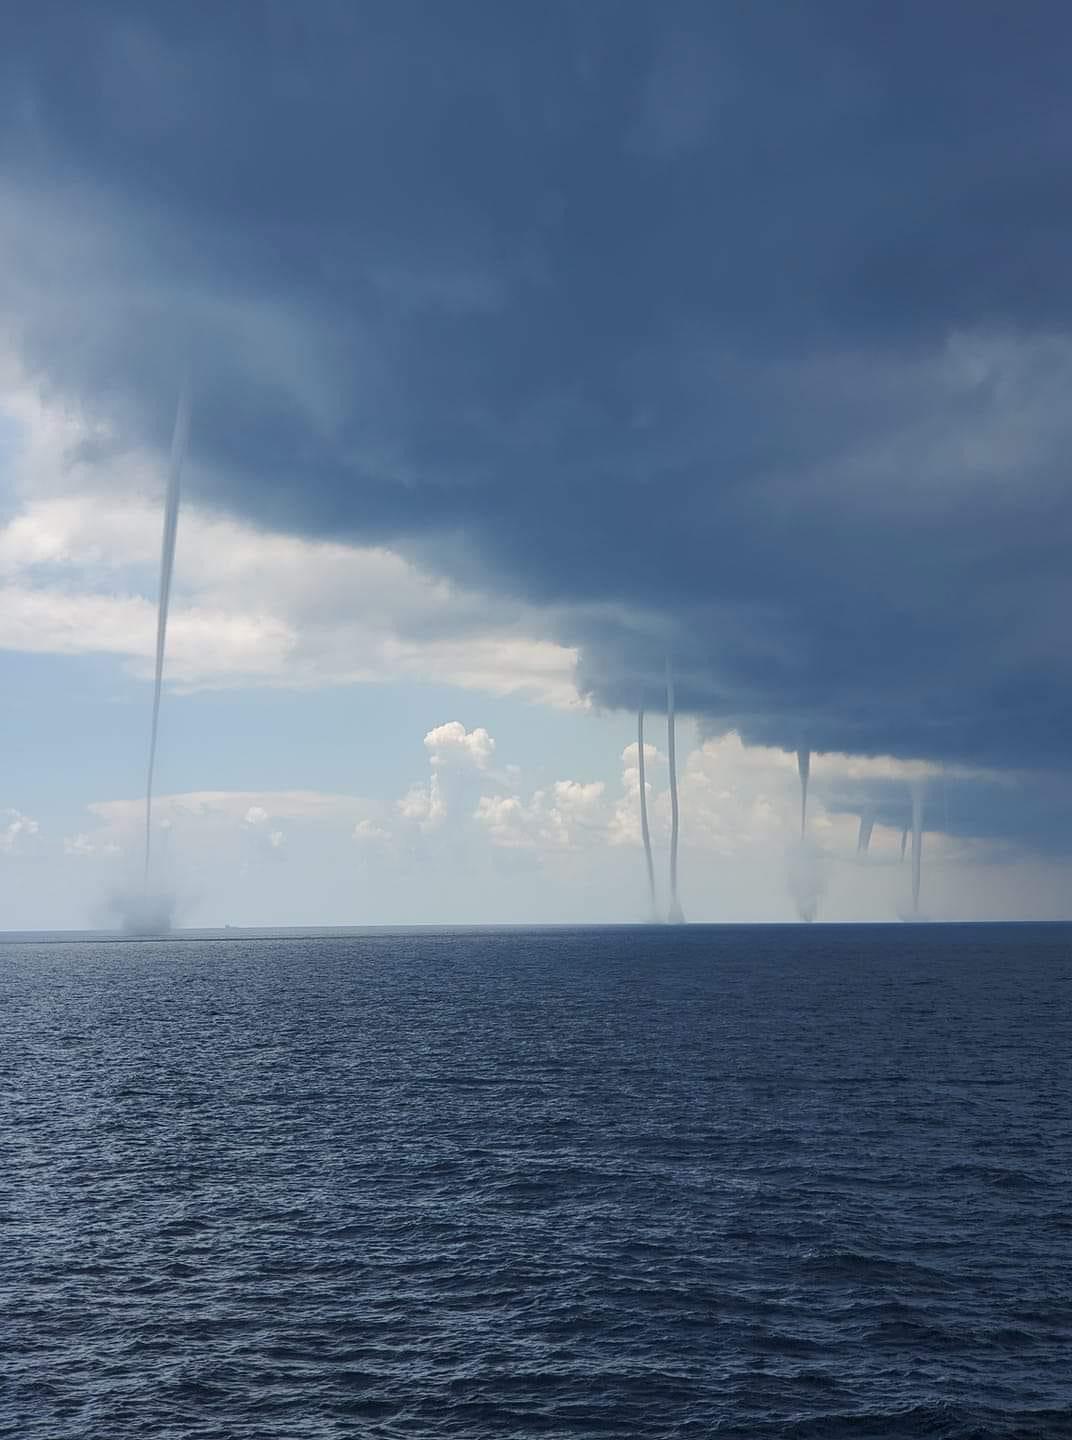 There was extremely tense weather conditions in the Gulf of Mexico yesterday - The photo, Nature, Gulf of Mexico, Weather, Tornado, USA, Reddit